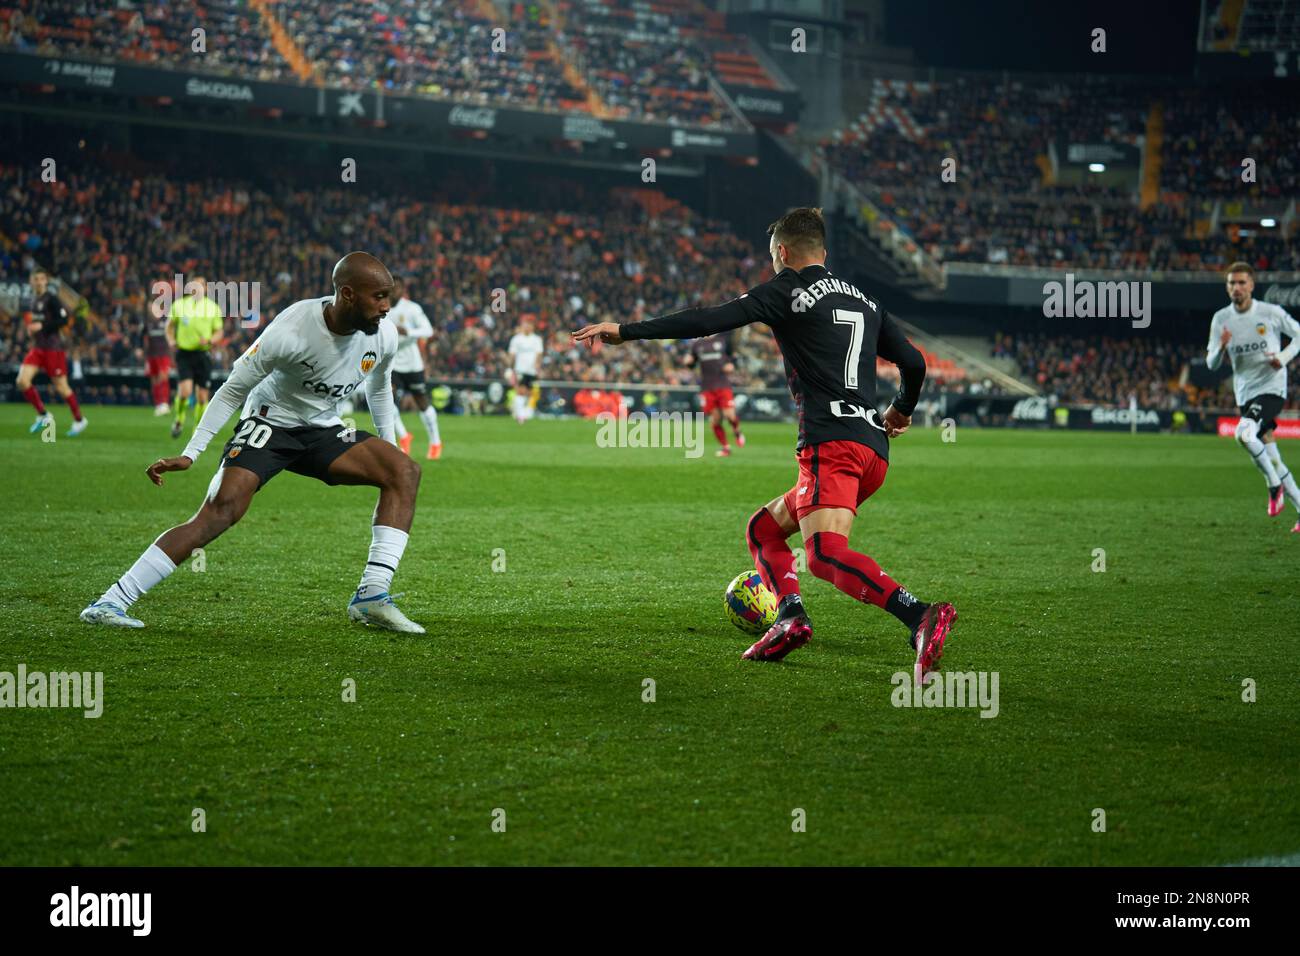 Dimitri Foulquier of Valencia CF (L) and Alejandro Berenguer Remiro of Atheltic Club (R) in action during the J21 Liga Santander  at Mestalla stadium Stock Photo